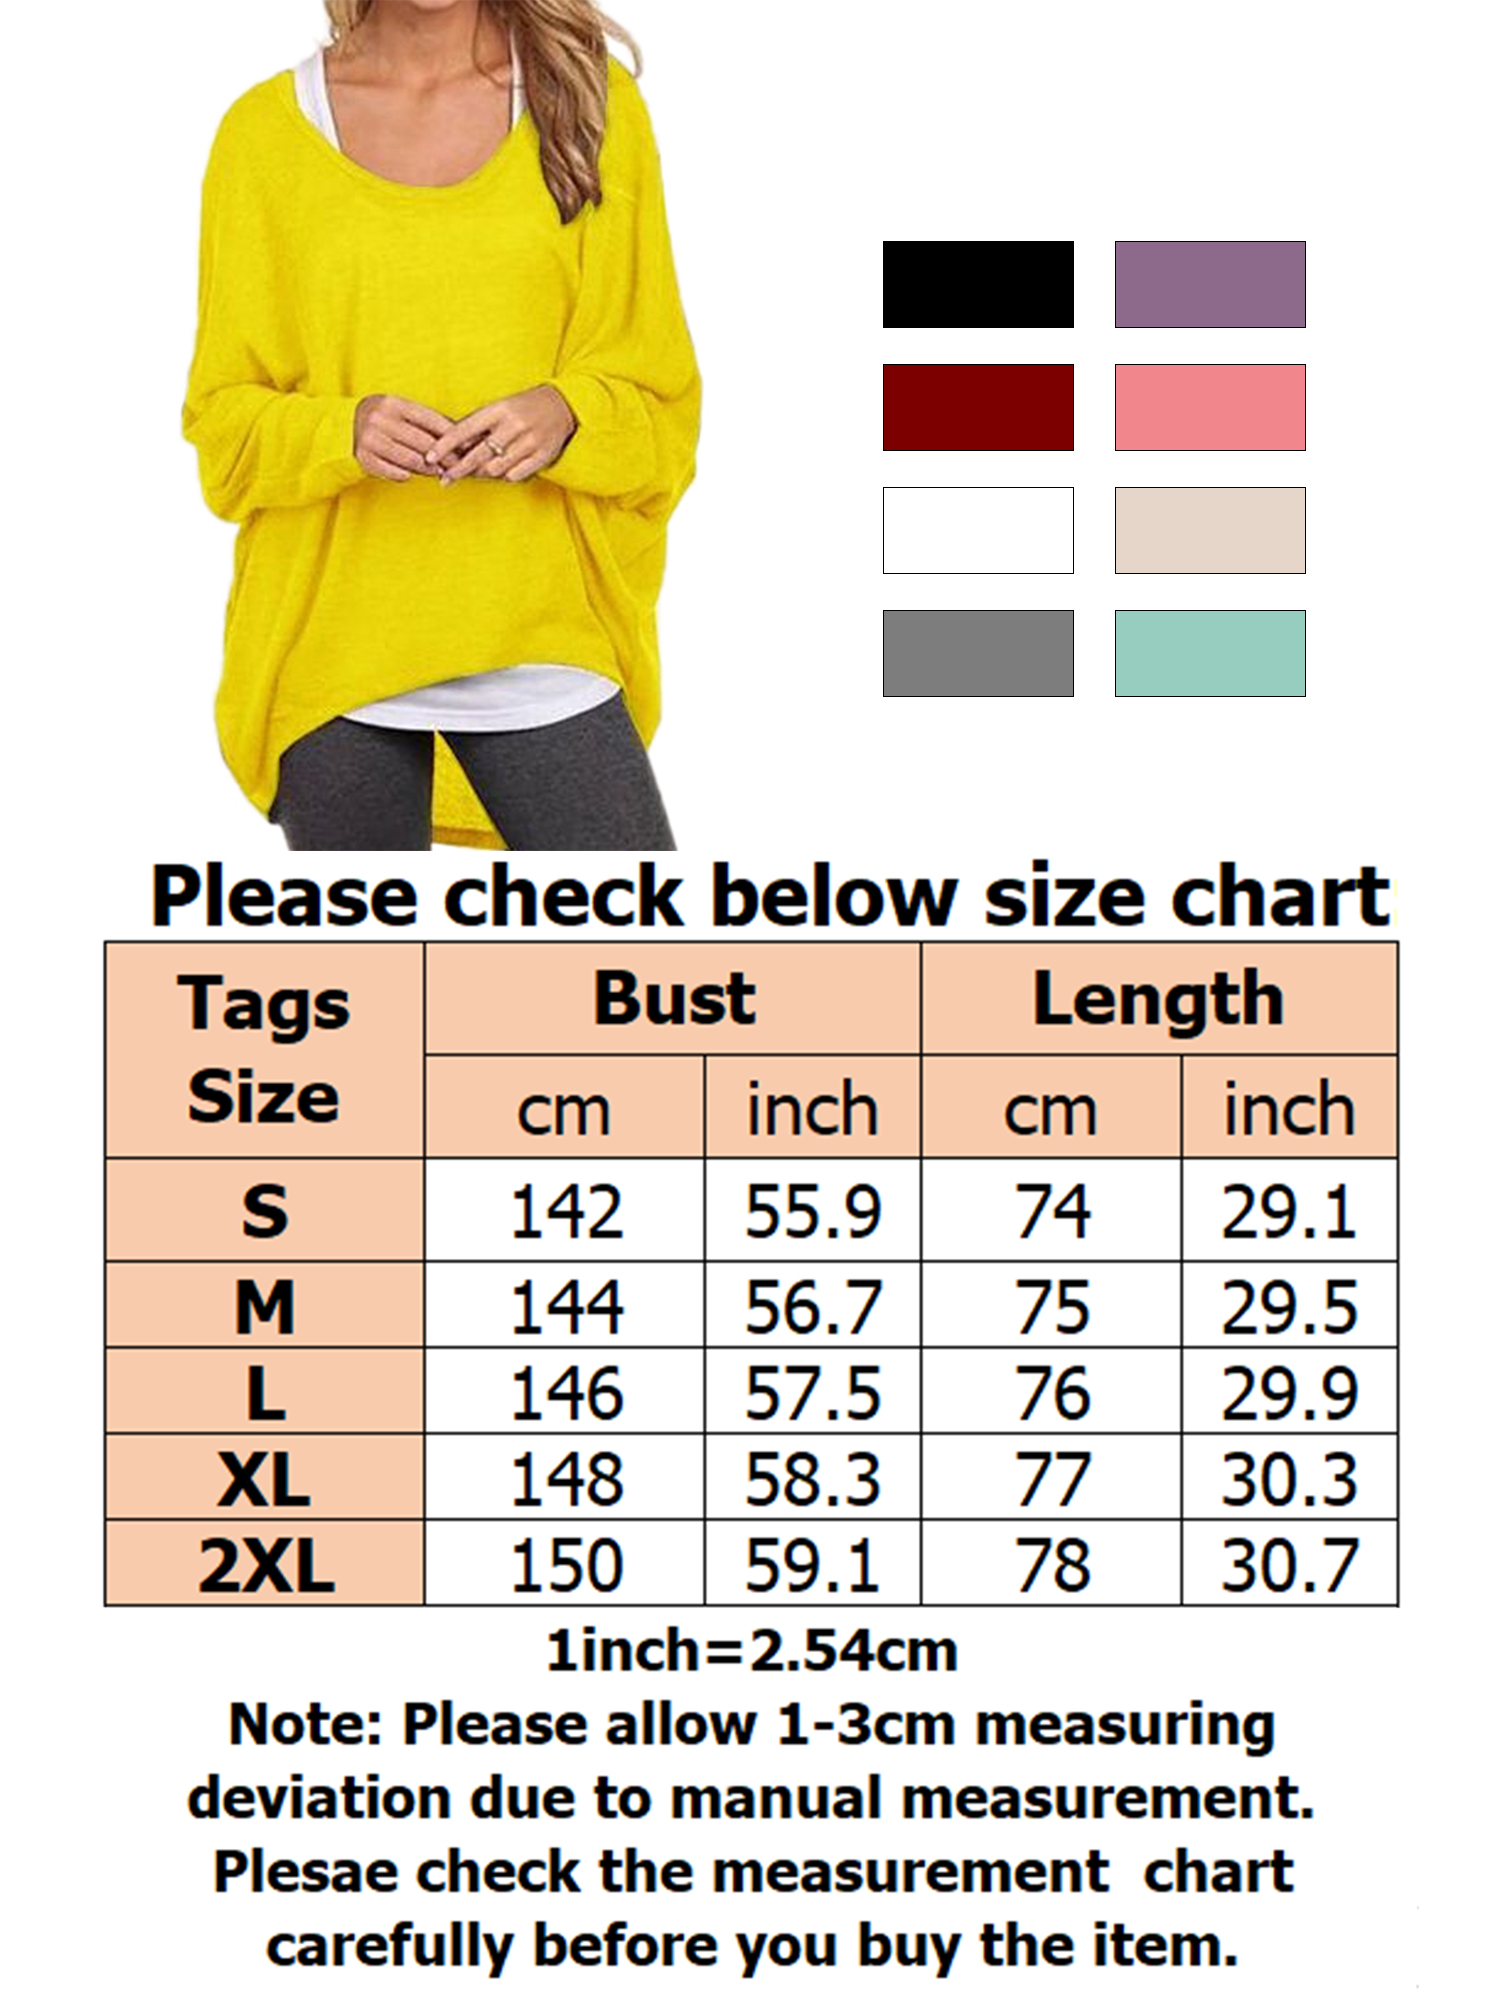 Loose Soft Knitted Casual Pullover Sweaters For Woman Long Sleeve top Batwing Sleeve Winter Jumper High-low Ladies Knitted Sweater Jumper - image 2 of 2